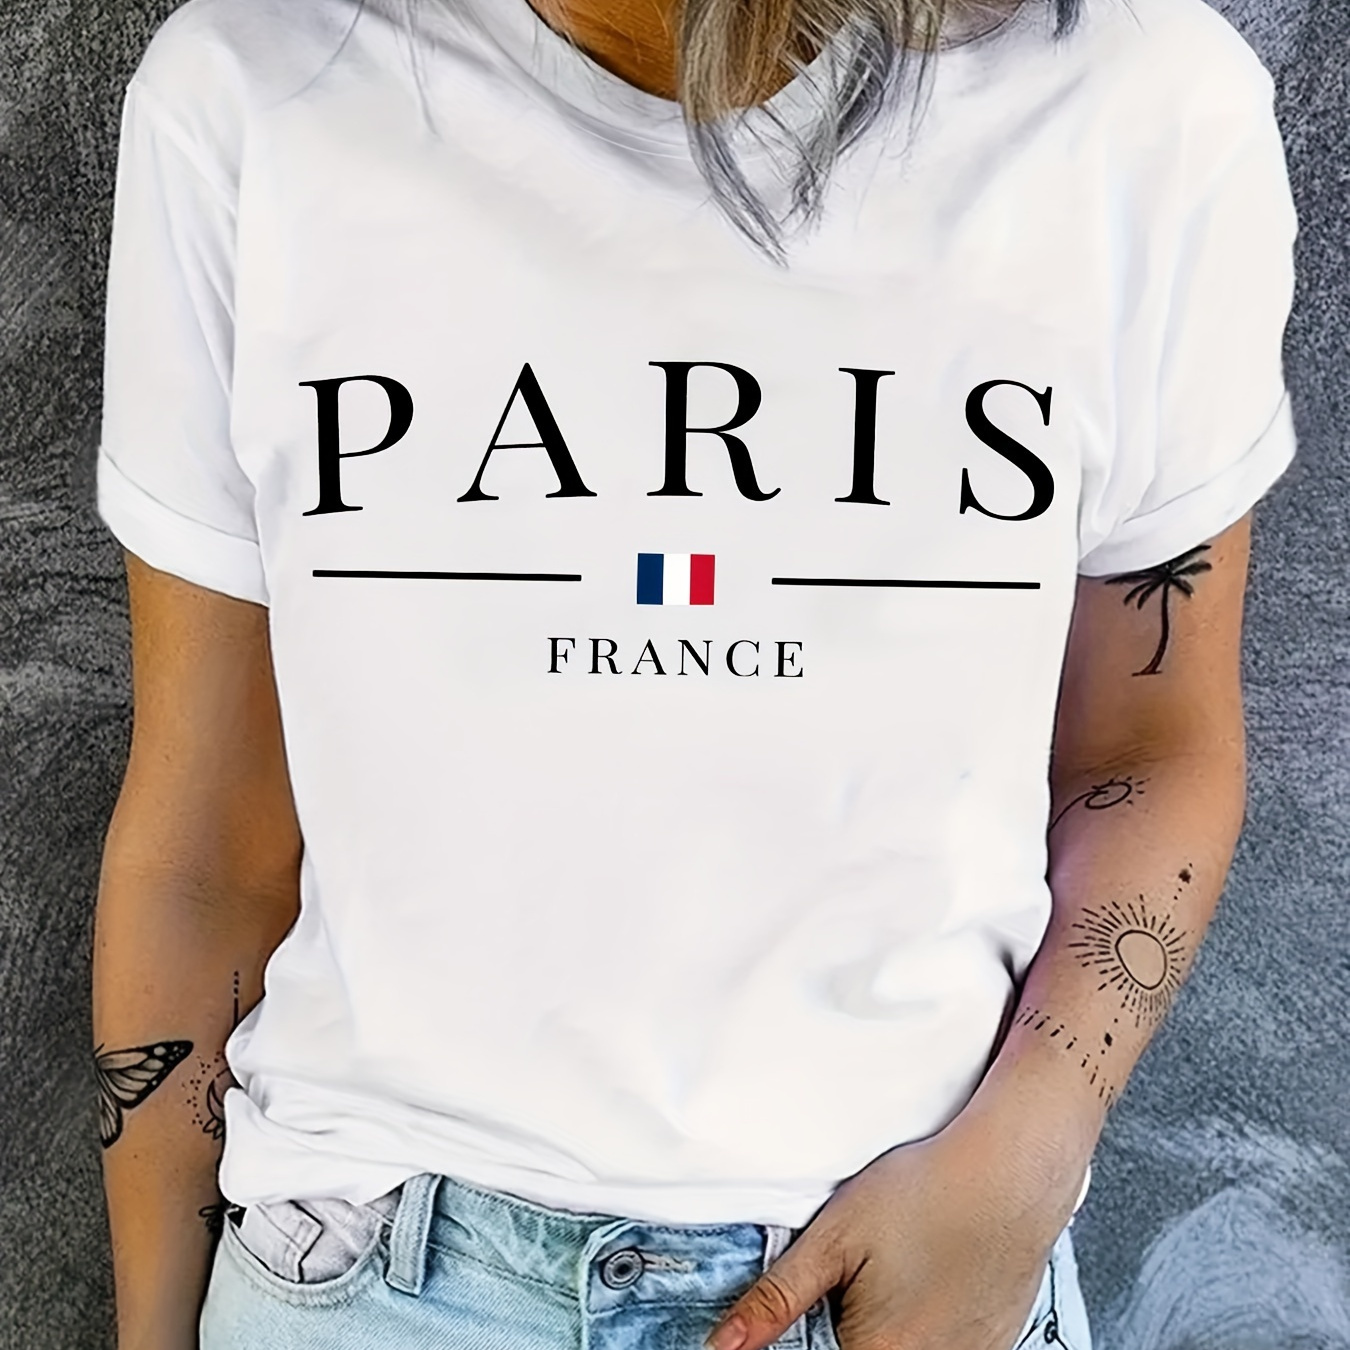 

Paris & Flag Print T-shirt, Short Sleeve Crew Neck Casual Top For Summer & Spring, Women's Clothing